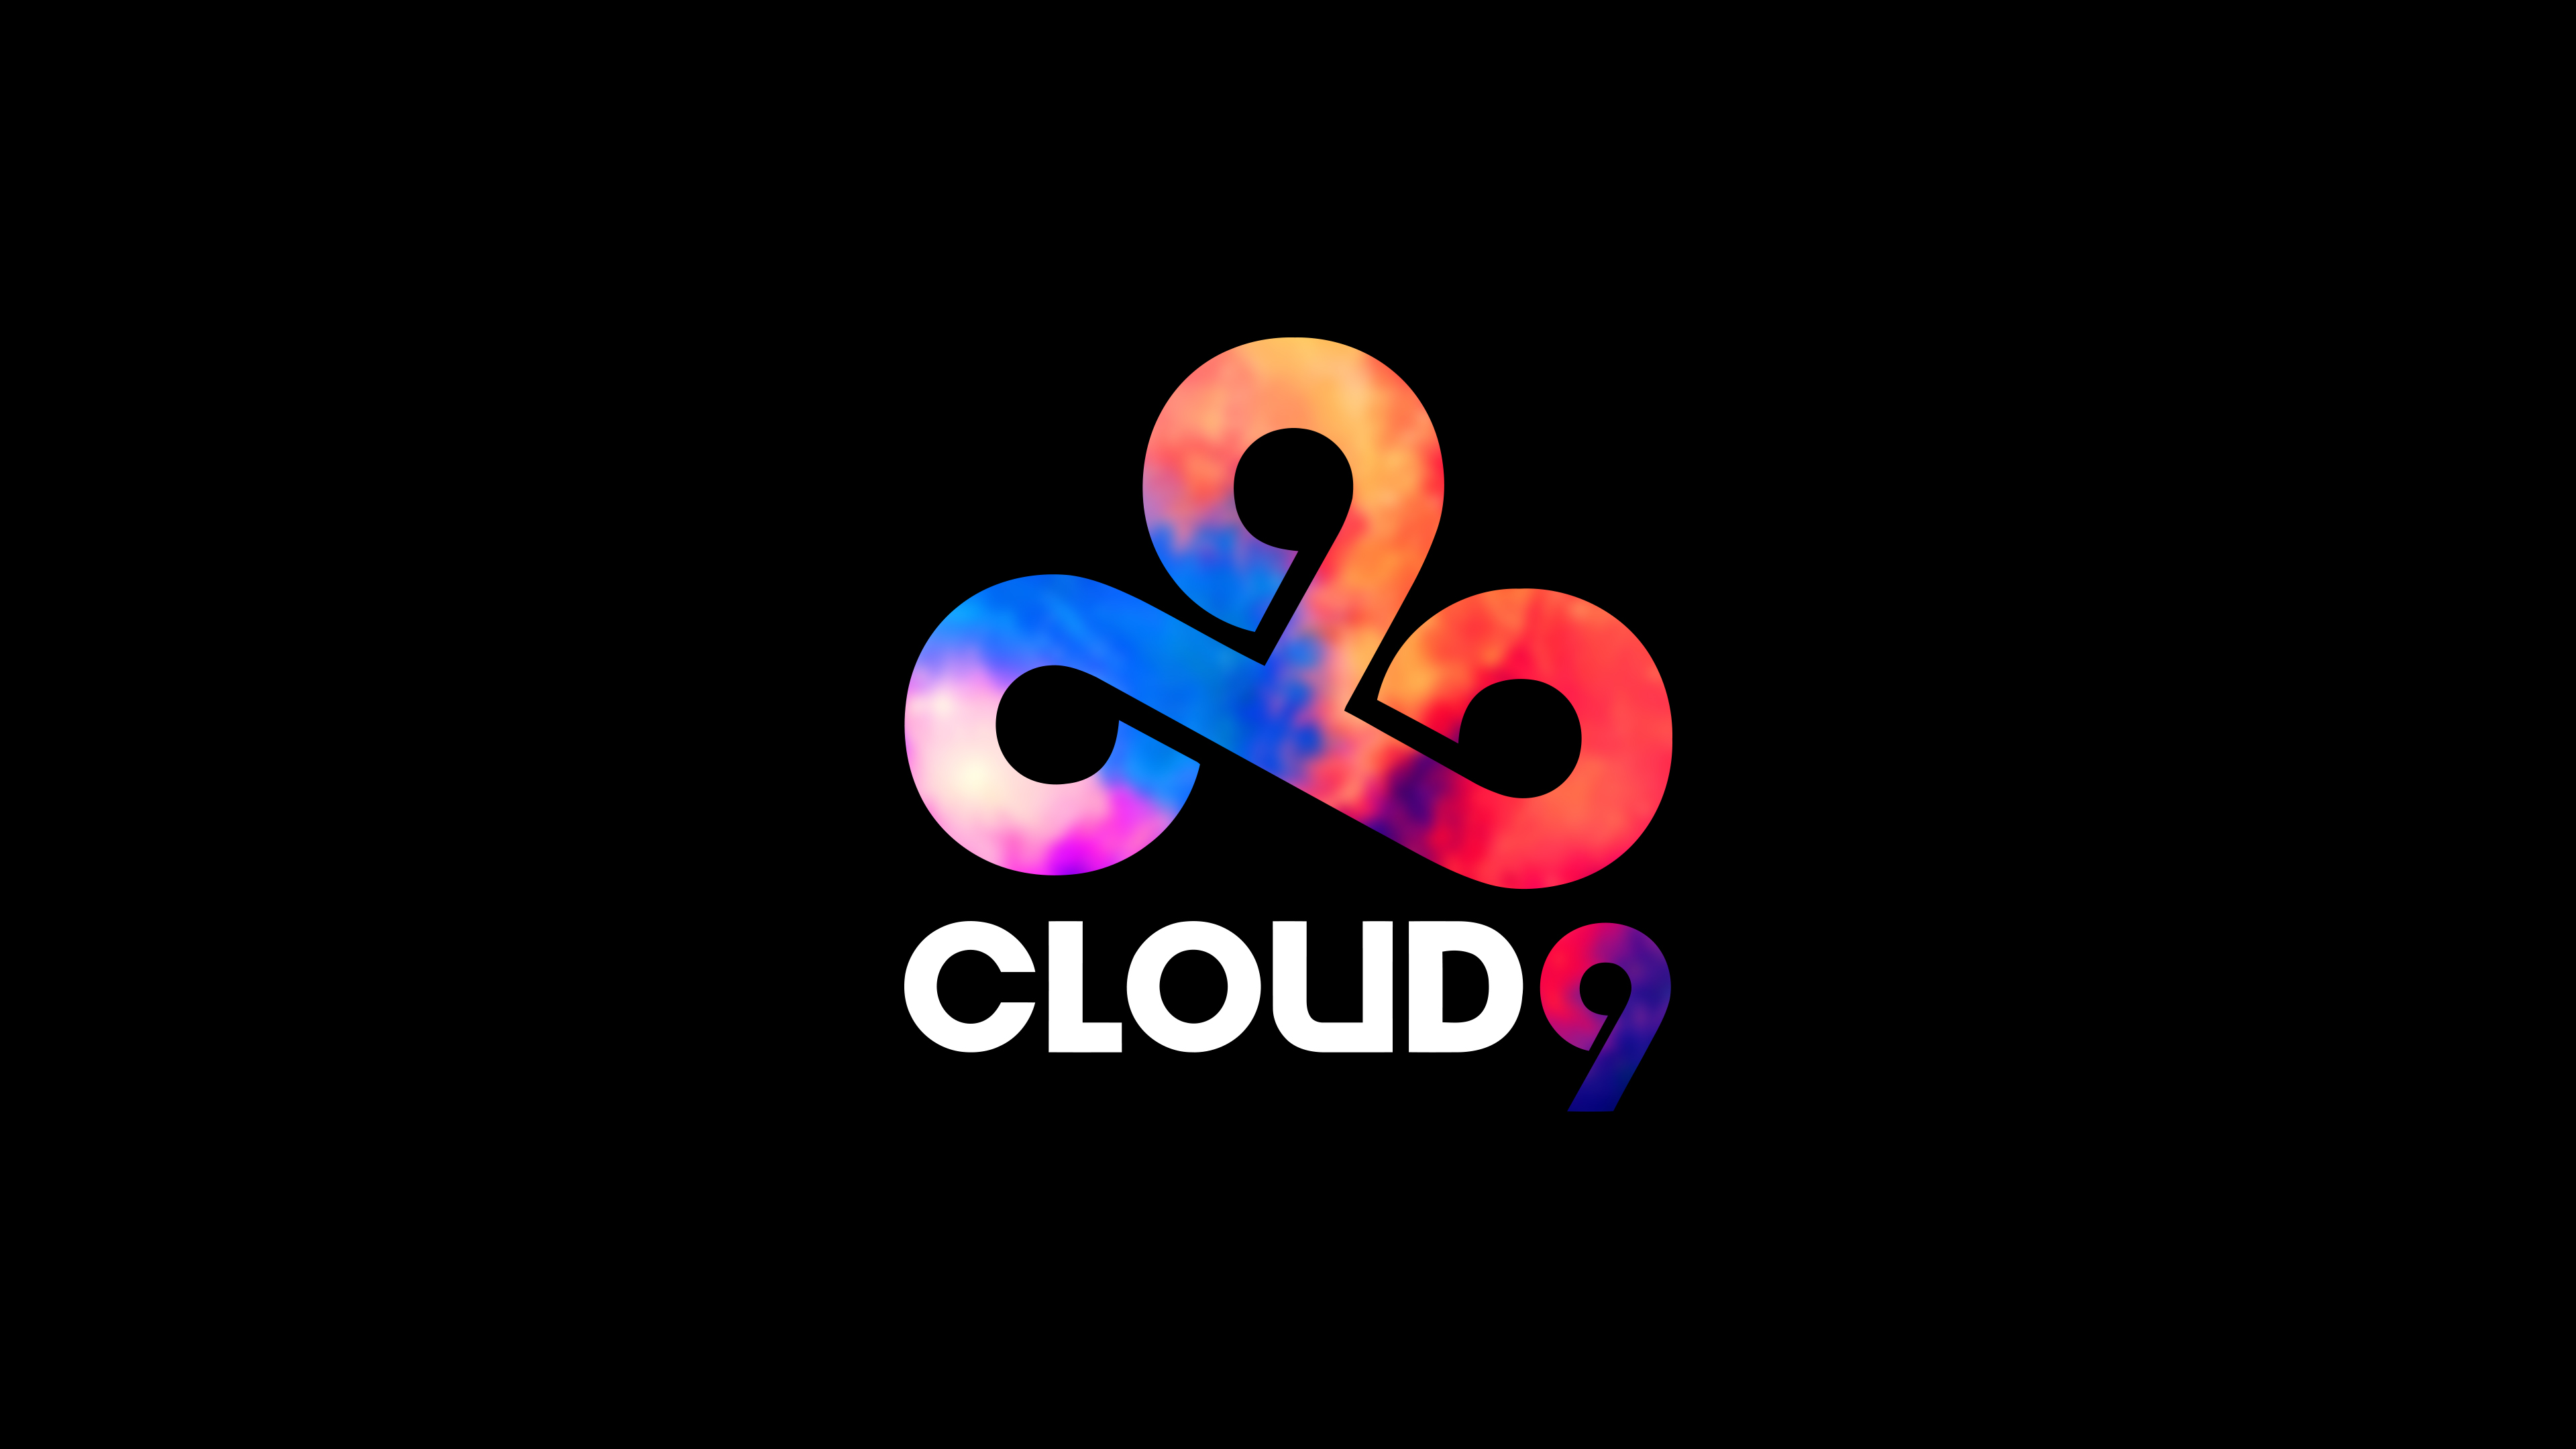 Cloud9 HD Wallpaper by Johanngaming